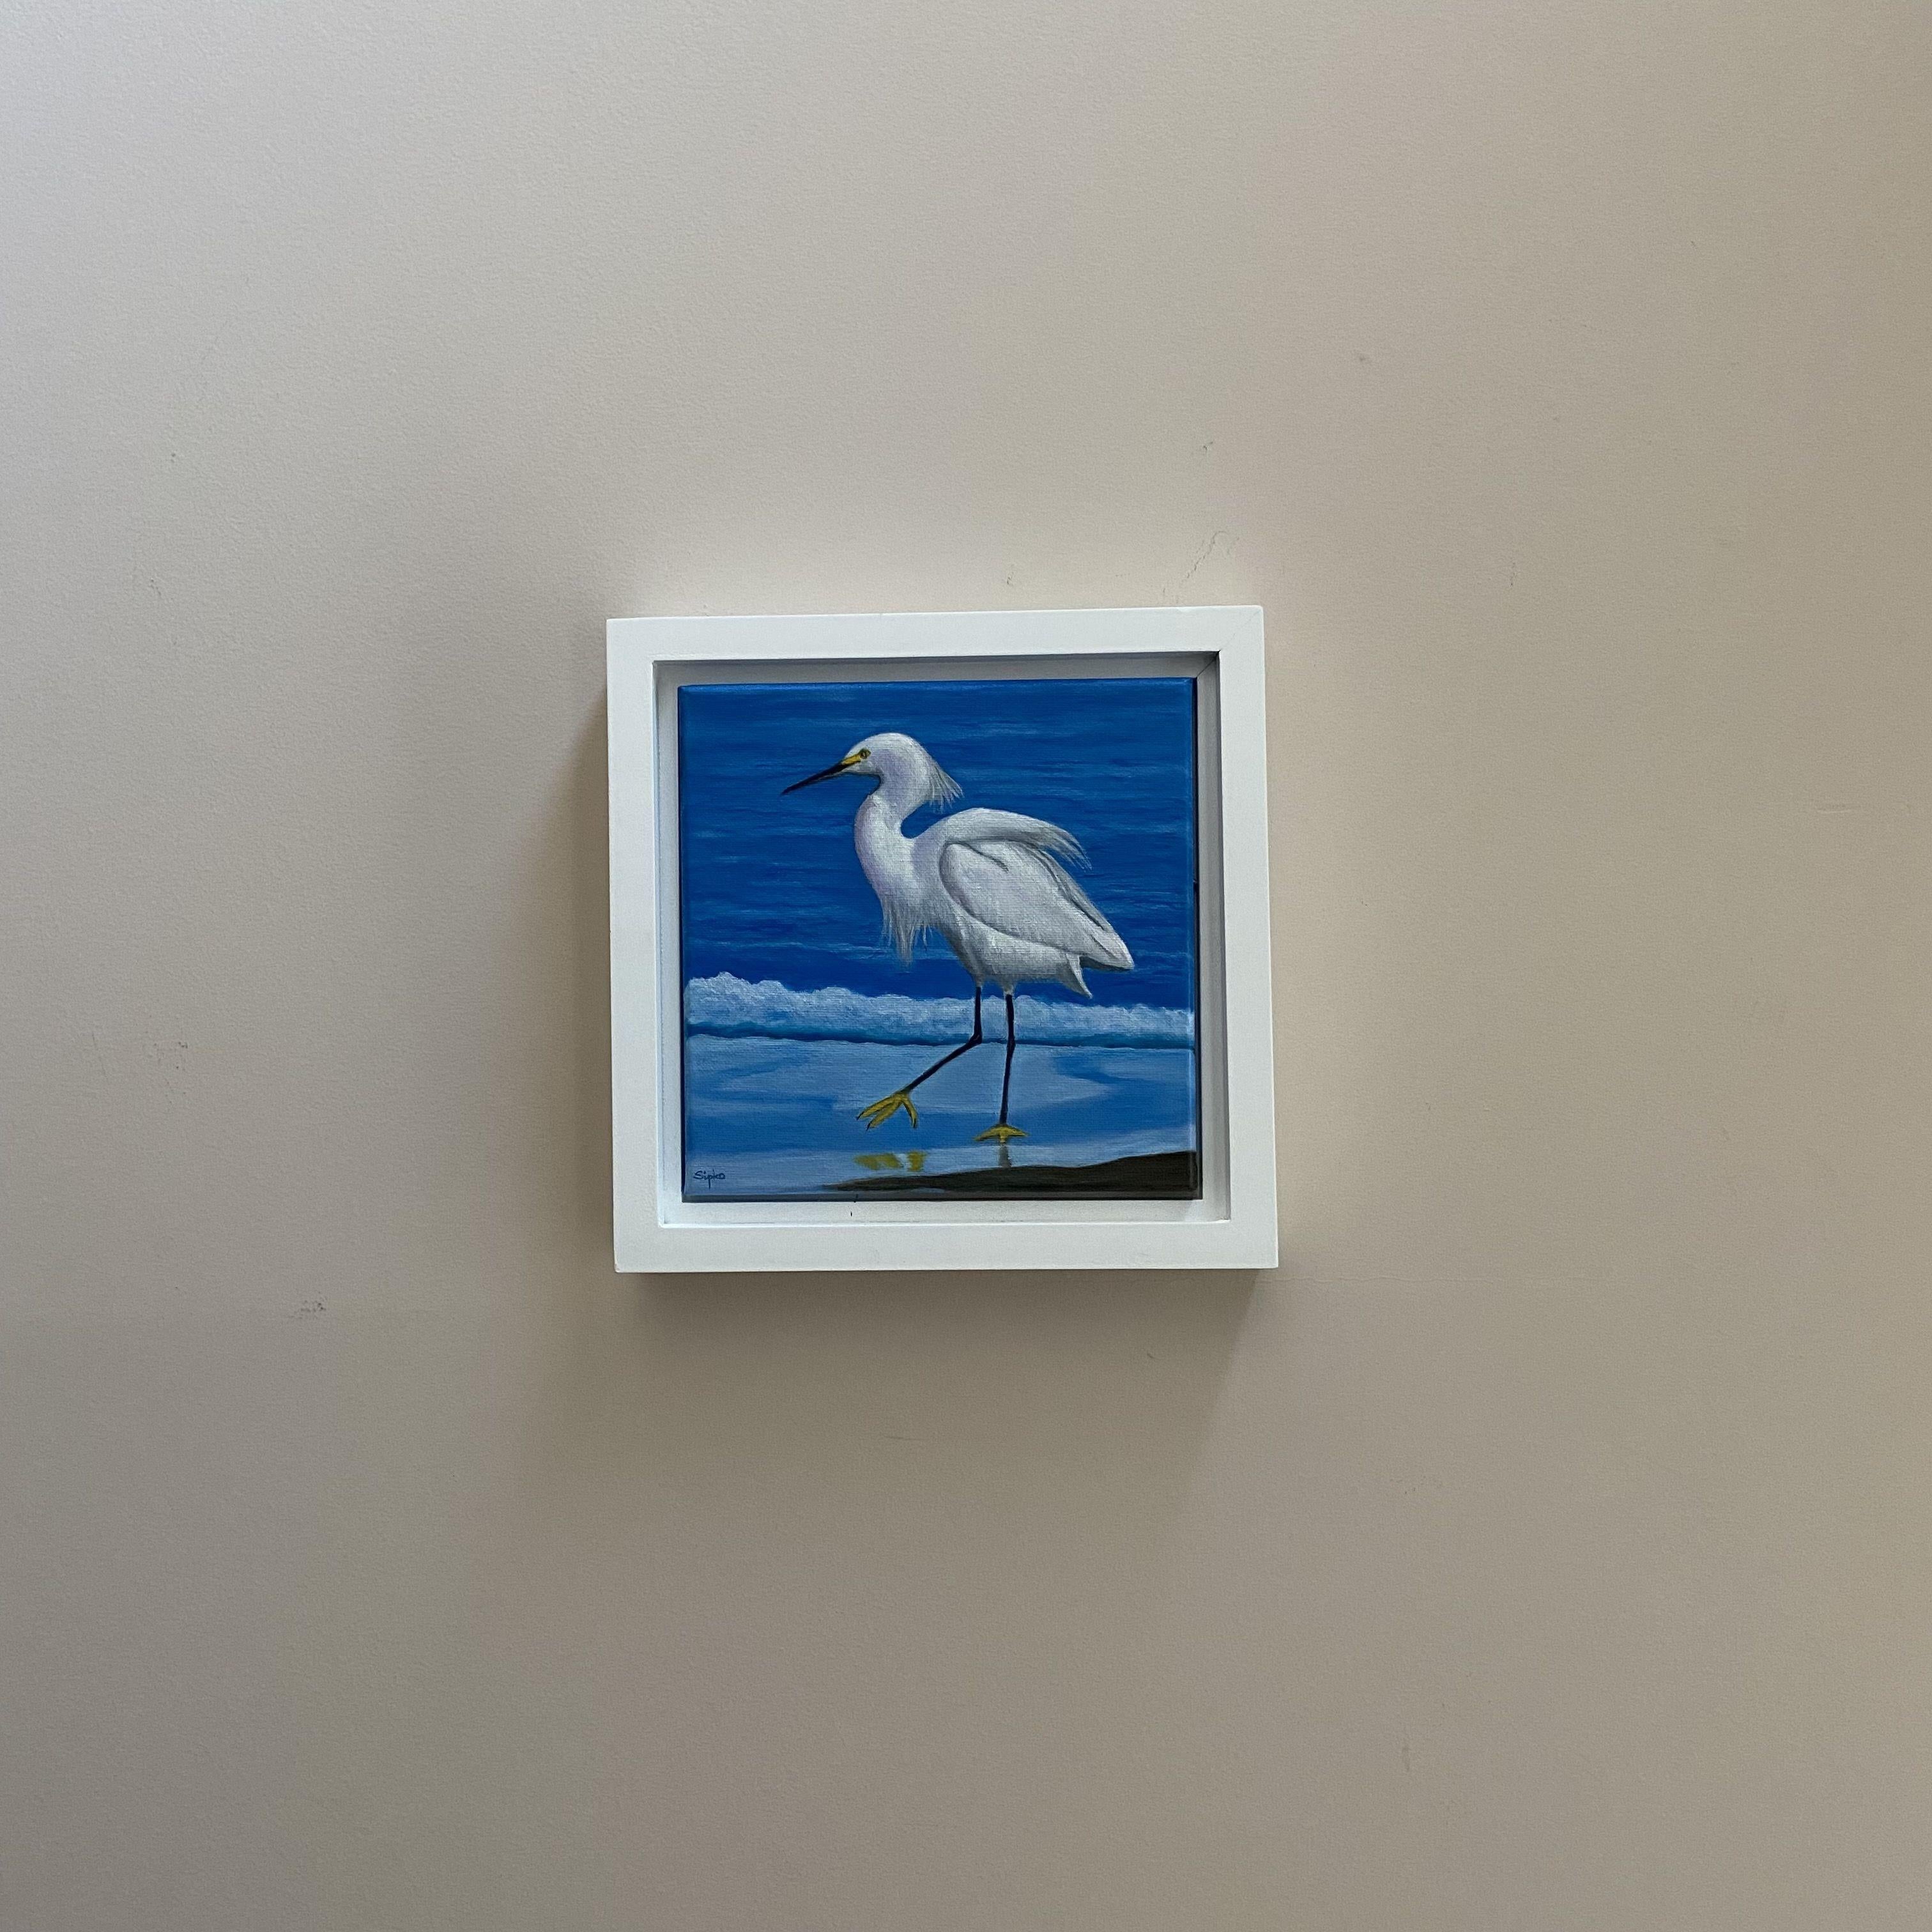 I live in an area that has many Egrets visiting in the summer.  This is a snowy egret walking the shoreline for a meal.  They are a performance art all to their own.  This piece is framed in a solid wood floater frame and is varnished and ready to